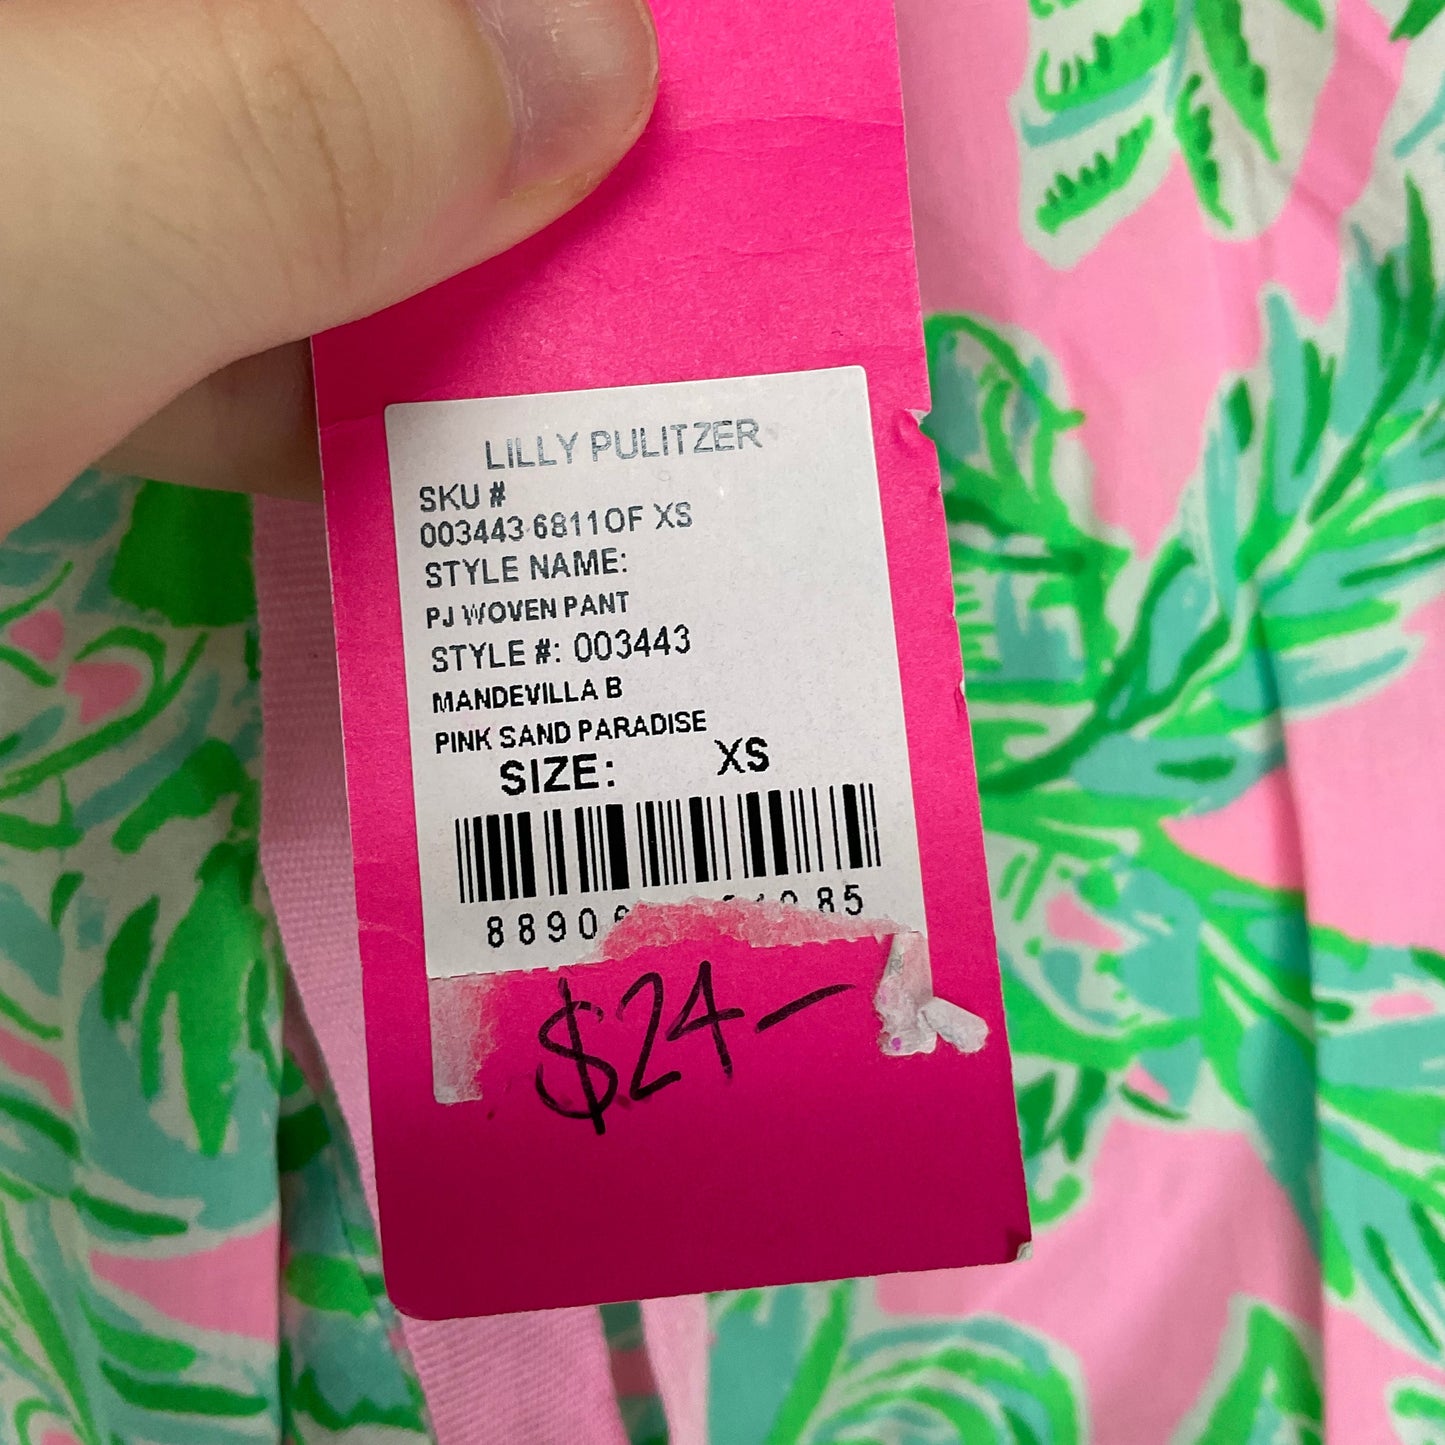 Green Pants Designer Lilly Pulitzer, Size Xs